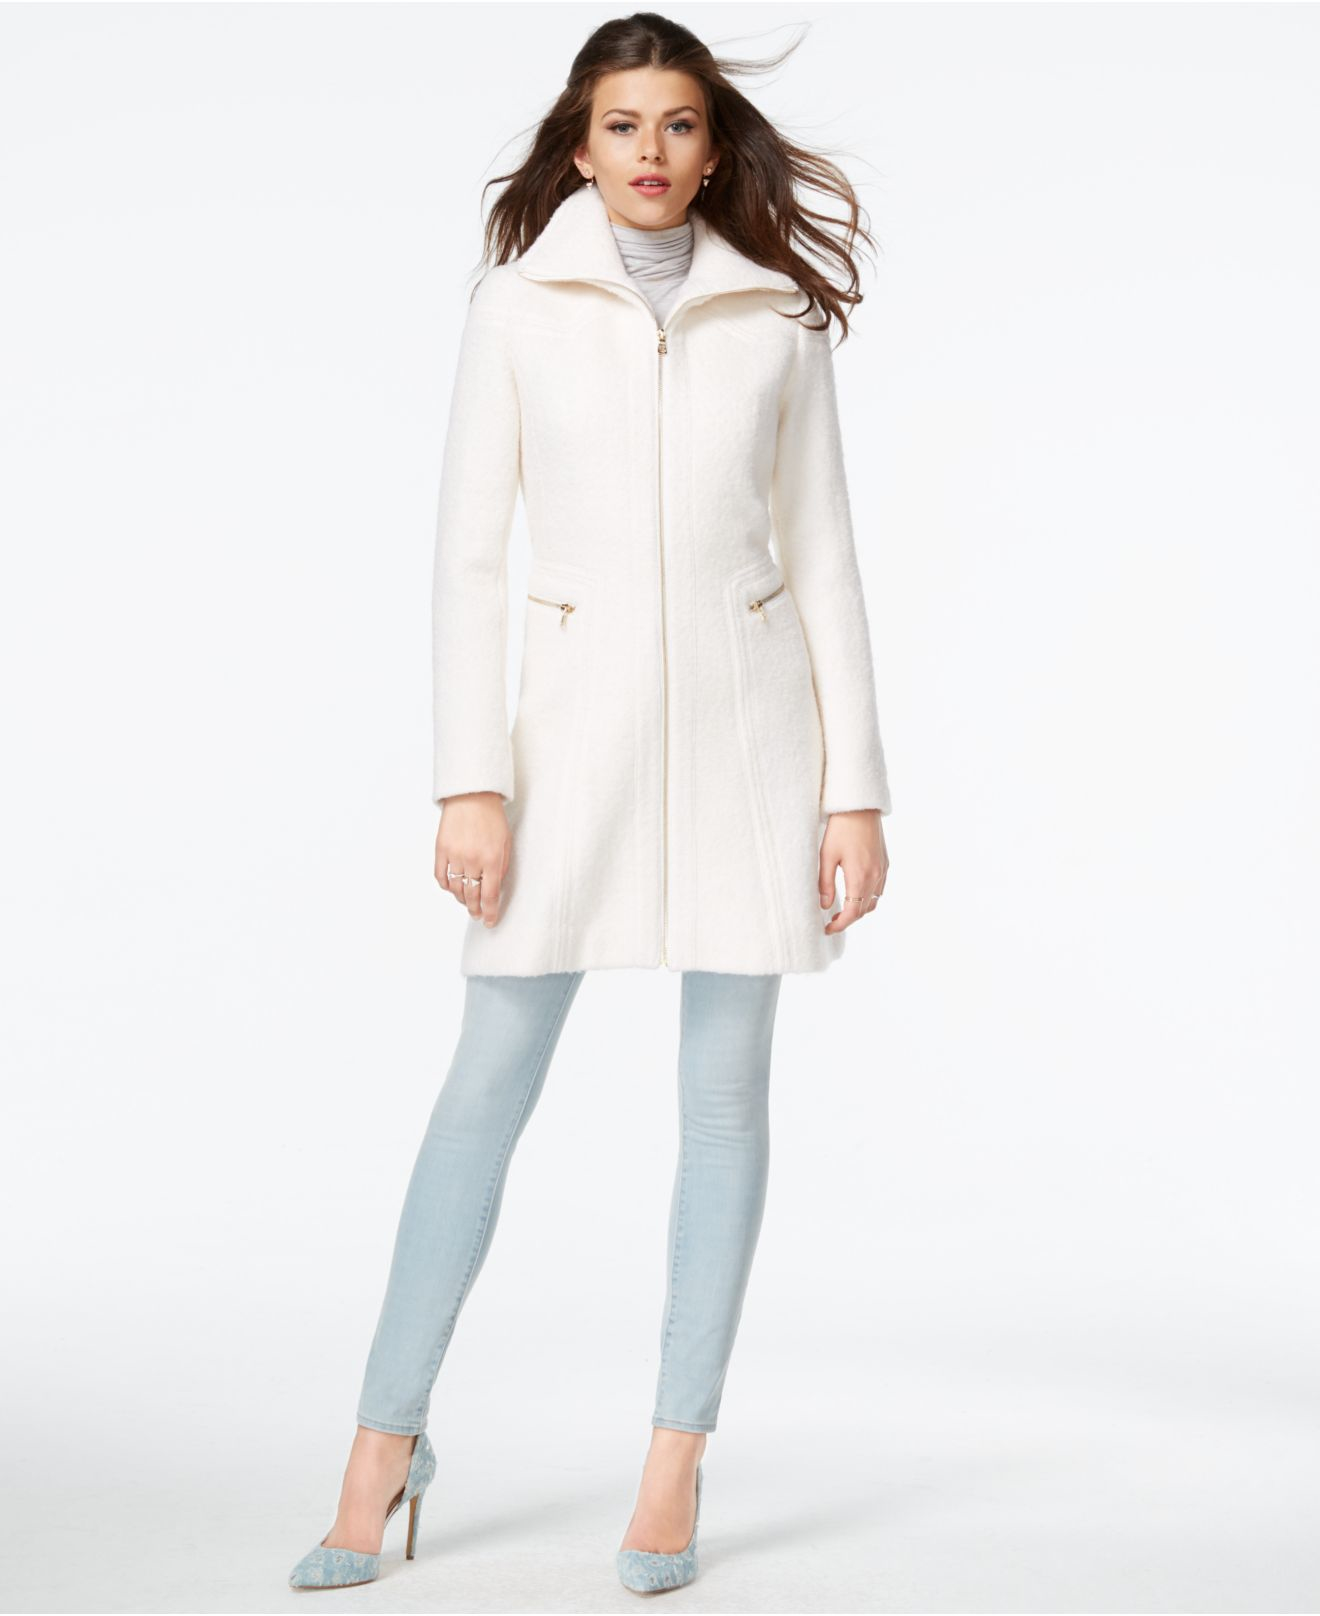 Jessica simpson Zip-front Wool Coat in White (Ivory) | Lyst1320 x 1616